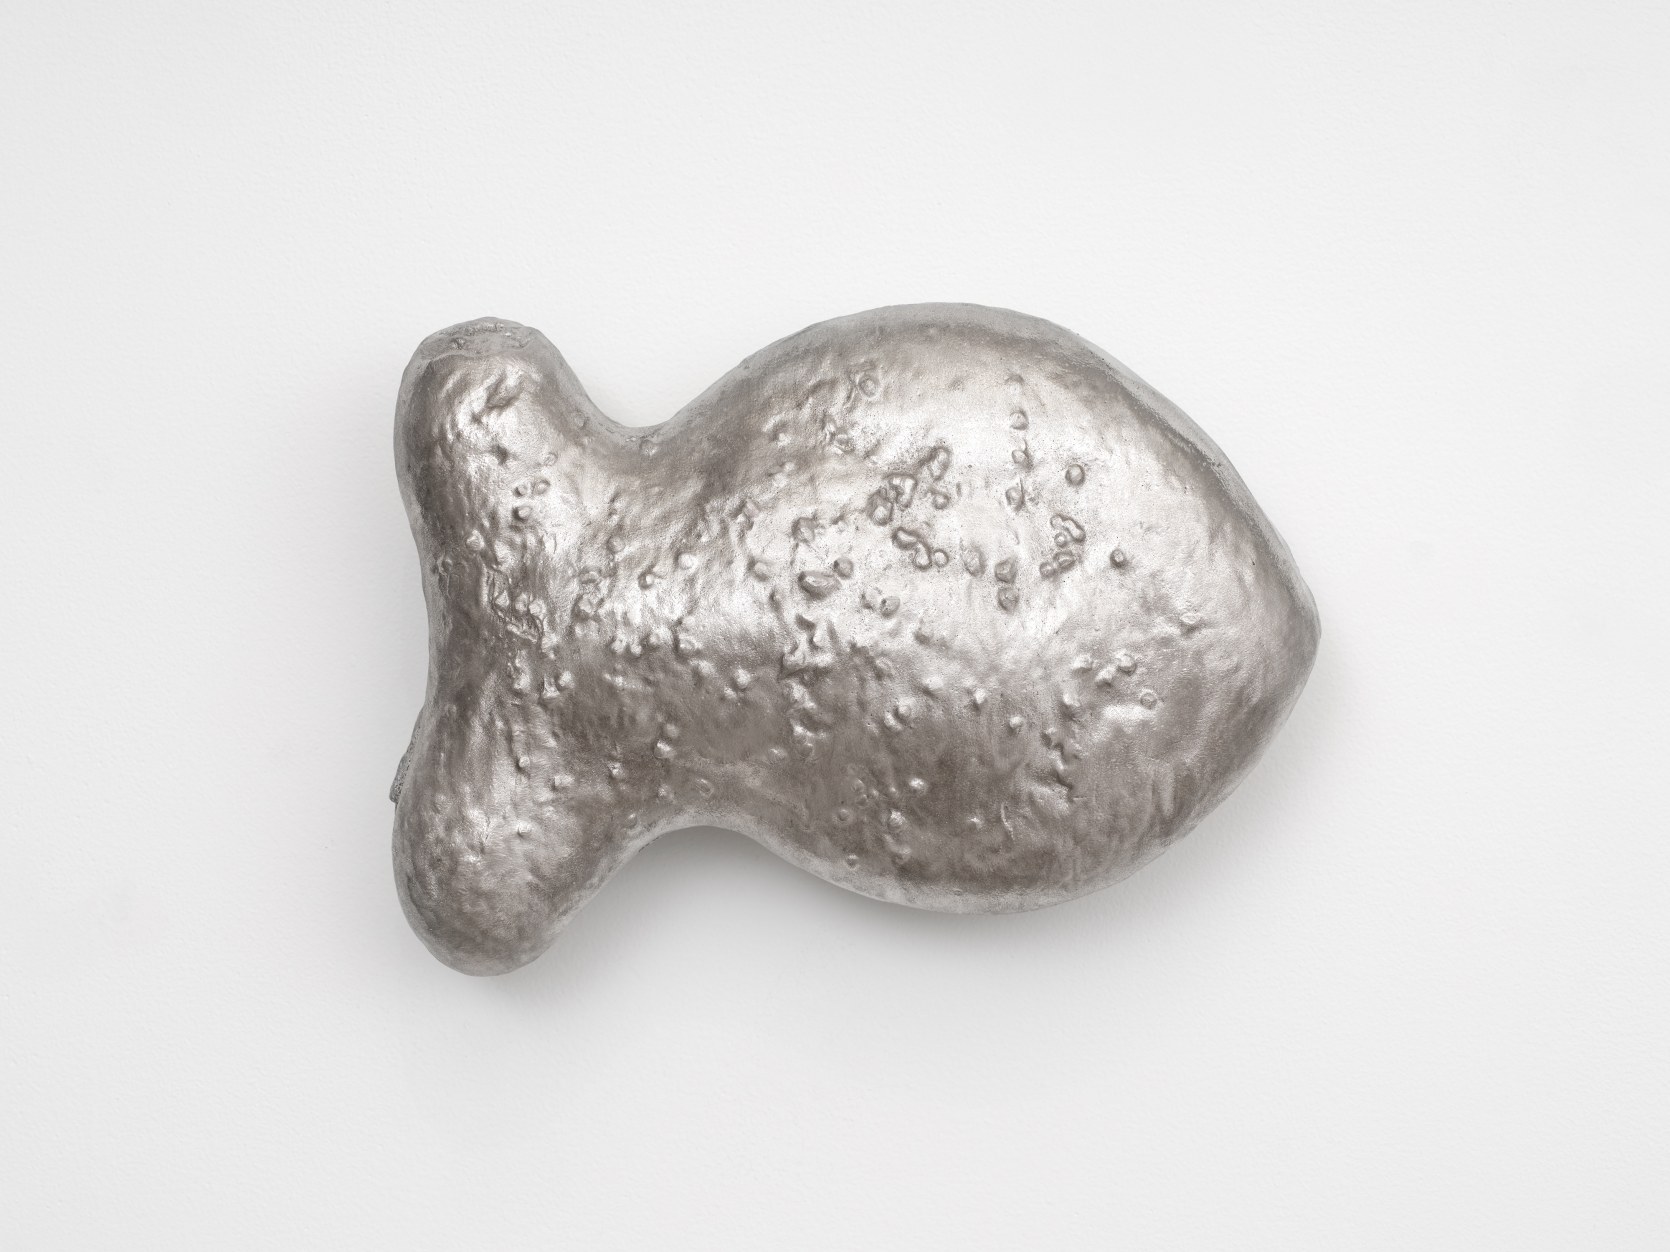  A large aluminum cast gold fish cracker mounted to the wall